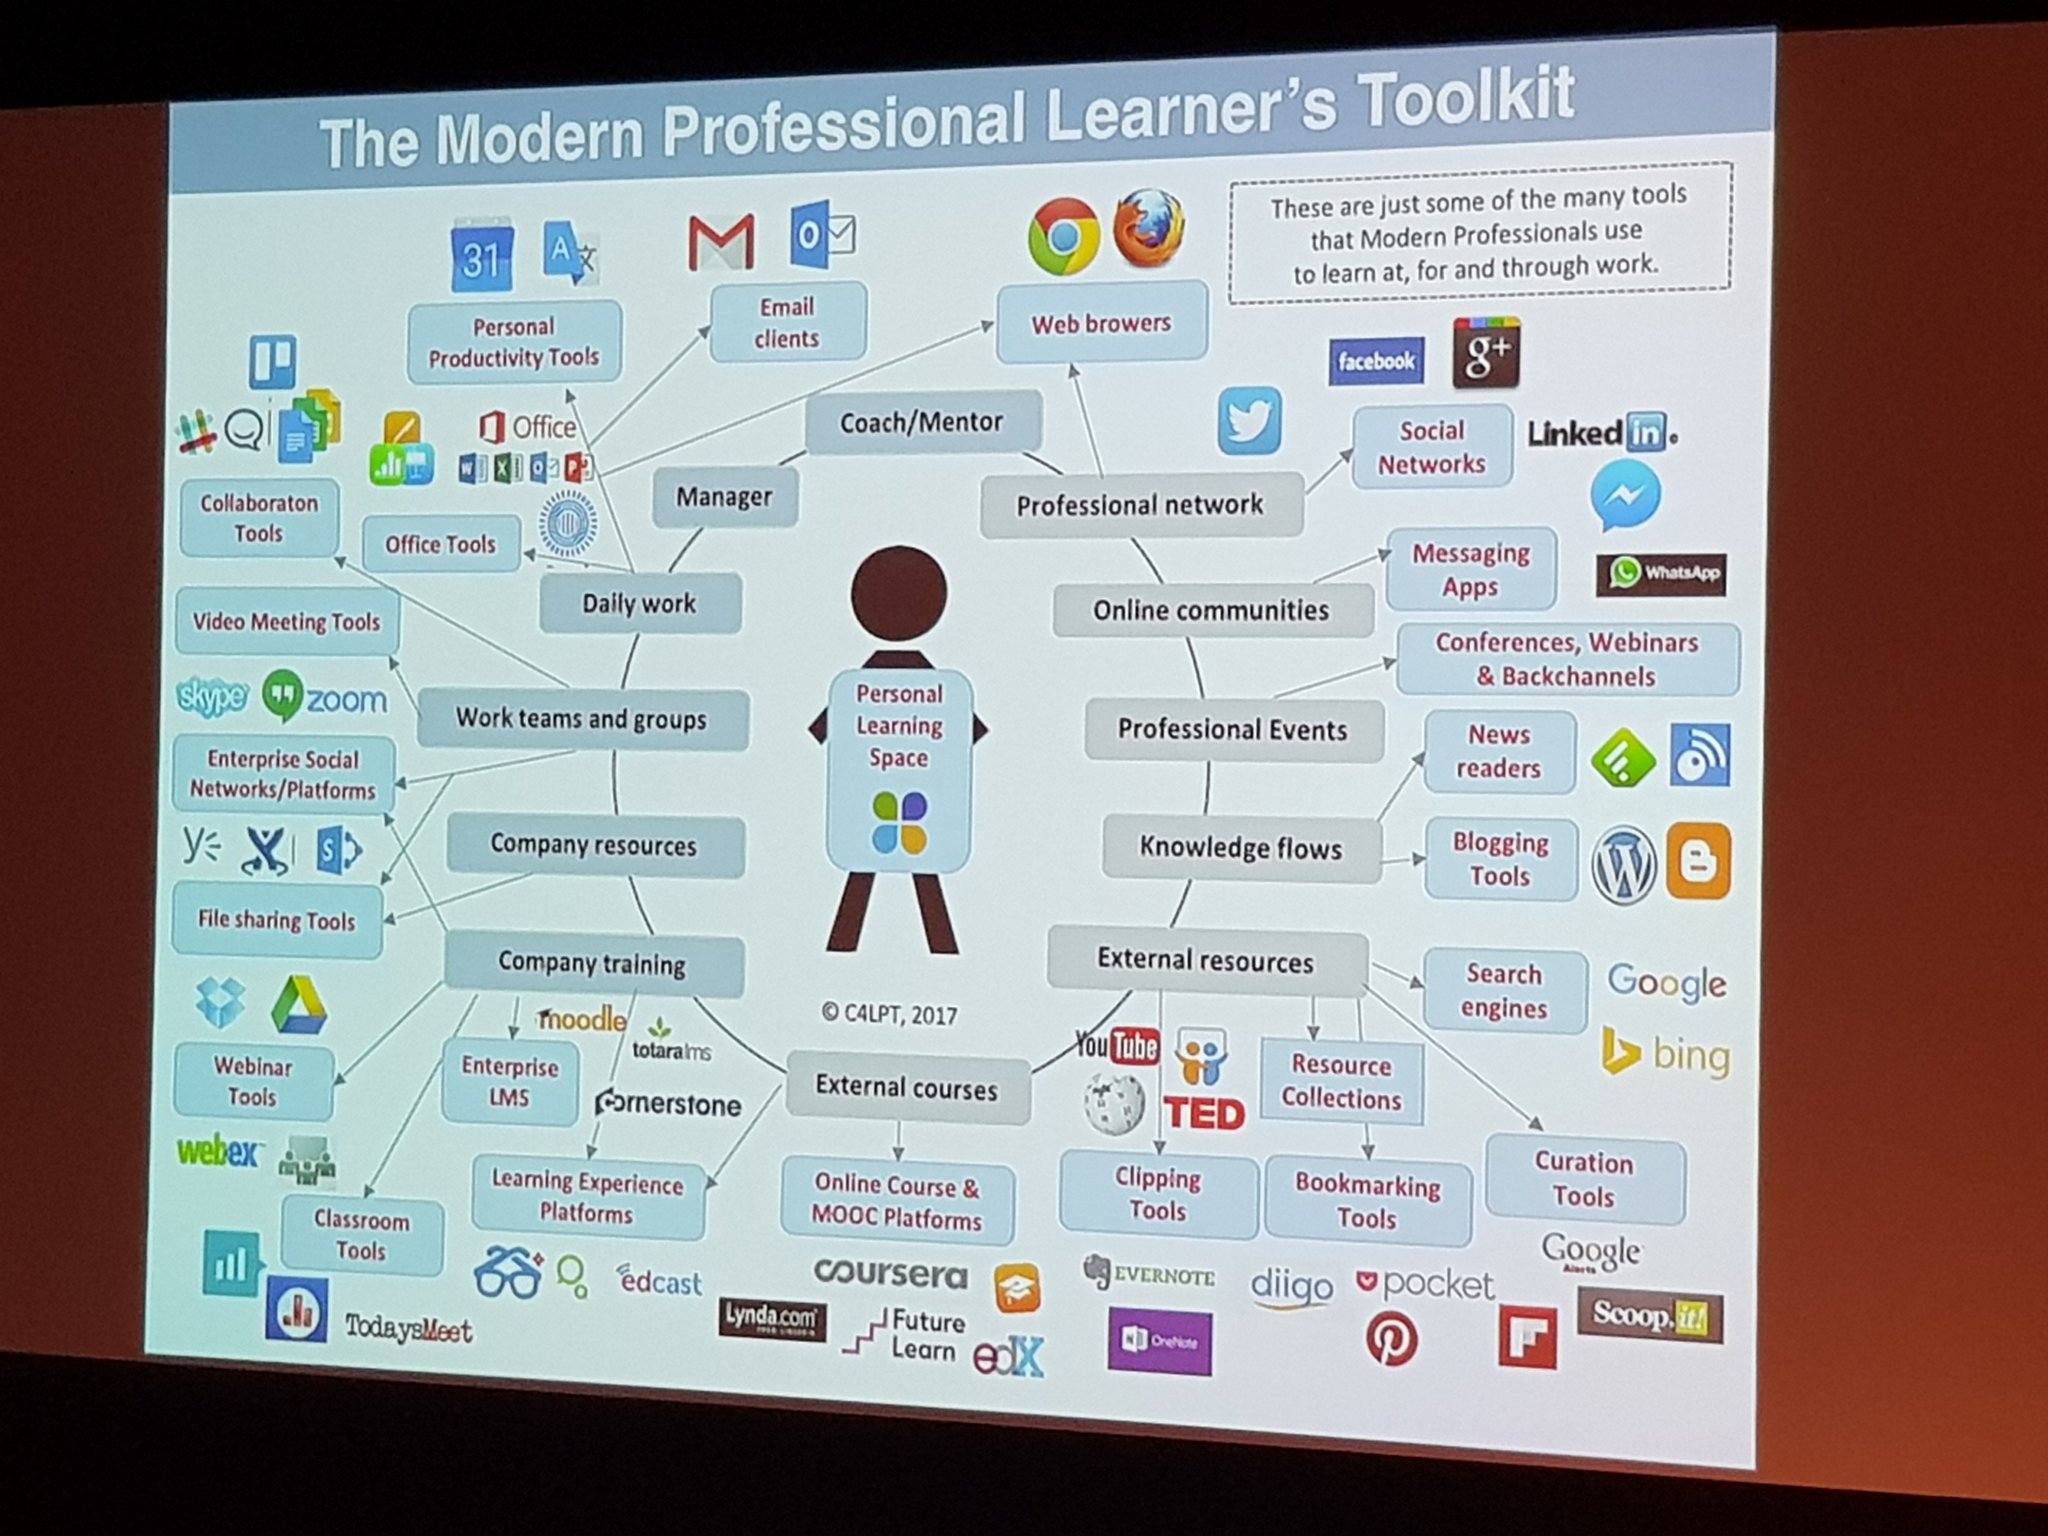 Suggestions of what tool modern professional learners are using  #susalt17 https://t.co/nt2FibFdAF